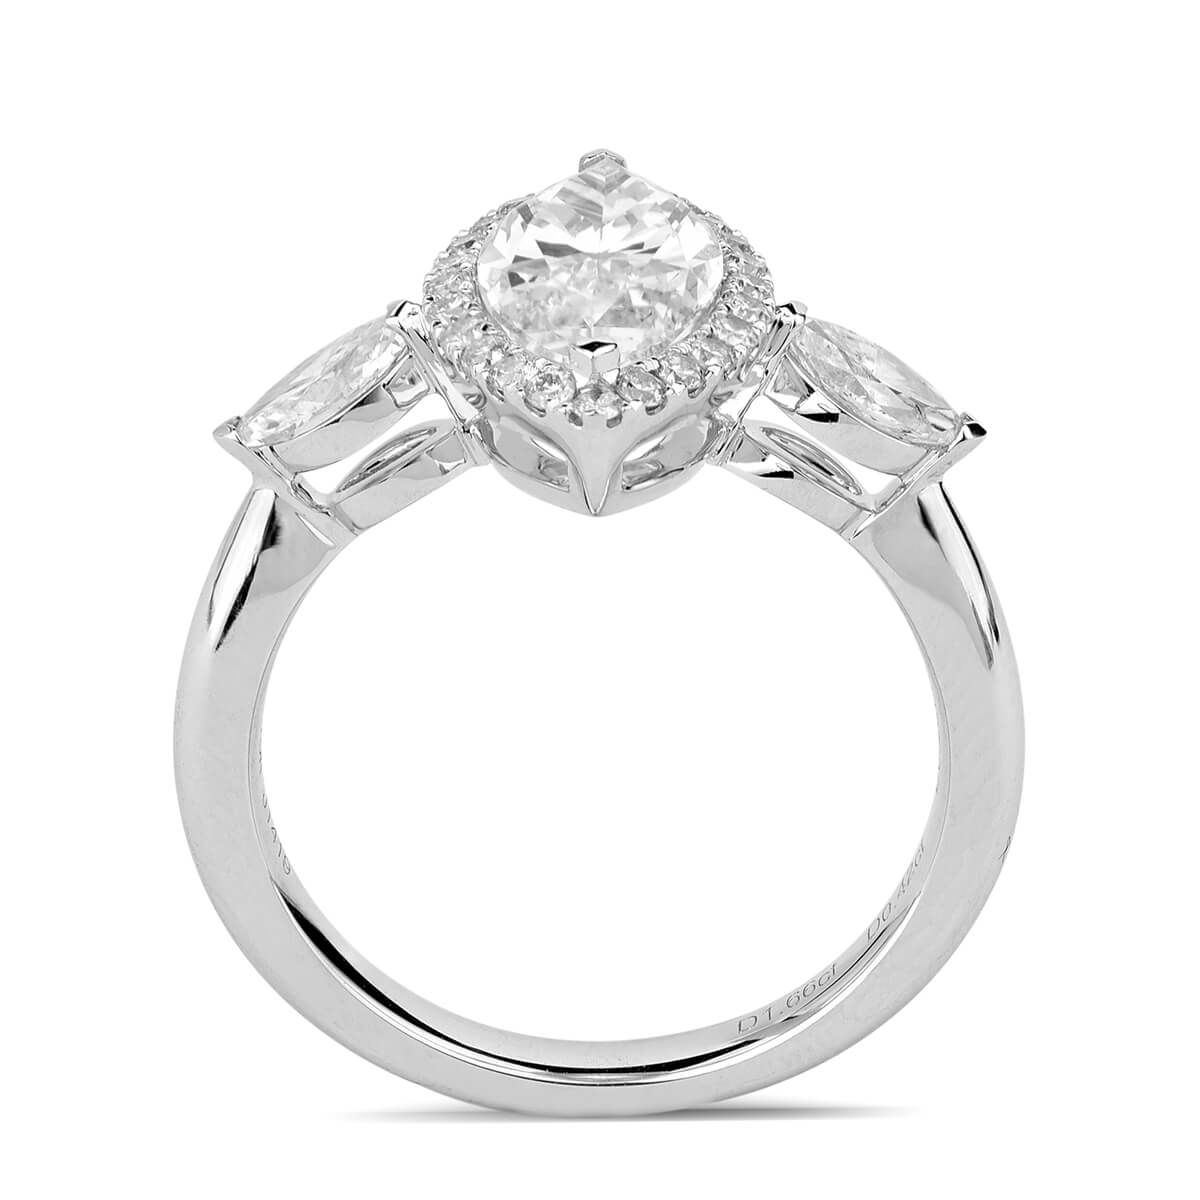  White Diamond Ring, 1.66 Ct. (2.30 Ct. TW), Marquise shape, EGL HK Certified, 1501255019